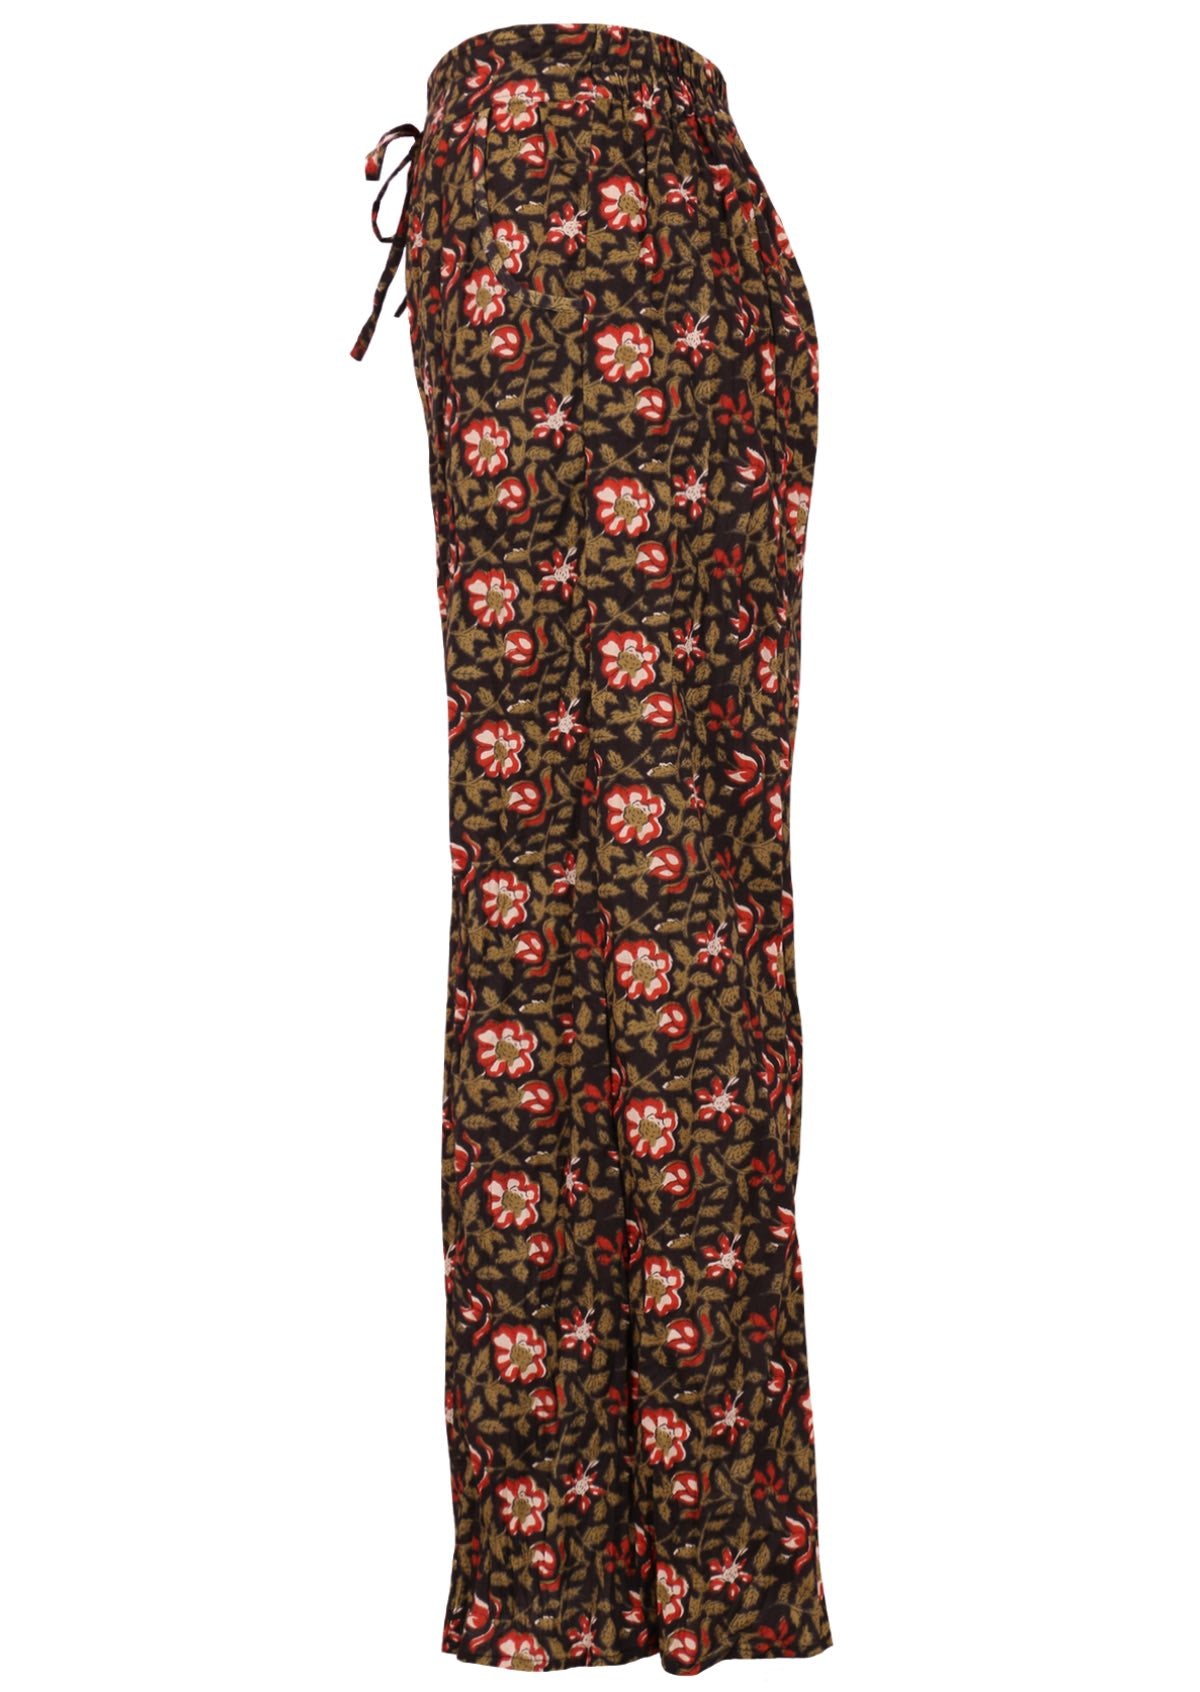 Janis Pants Wild Rose wide legged cotton women's pant with pockets 